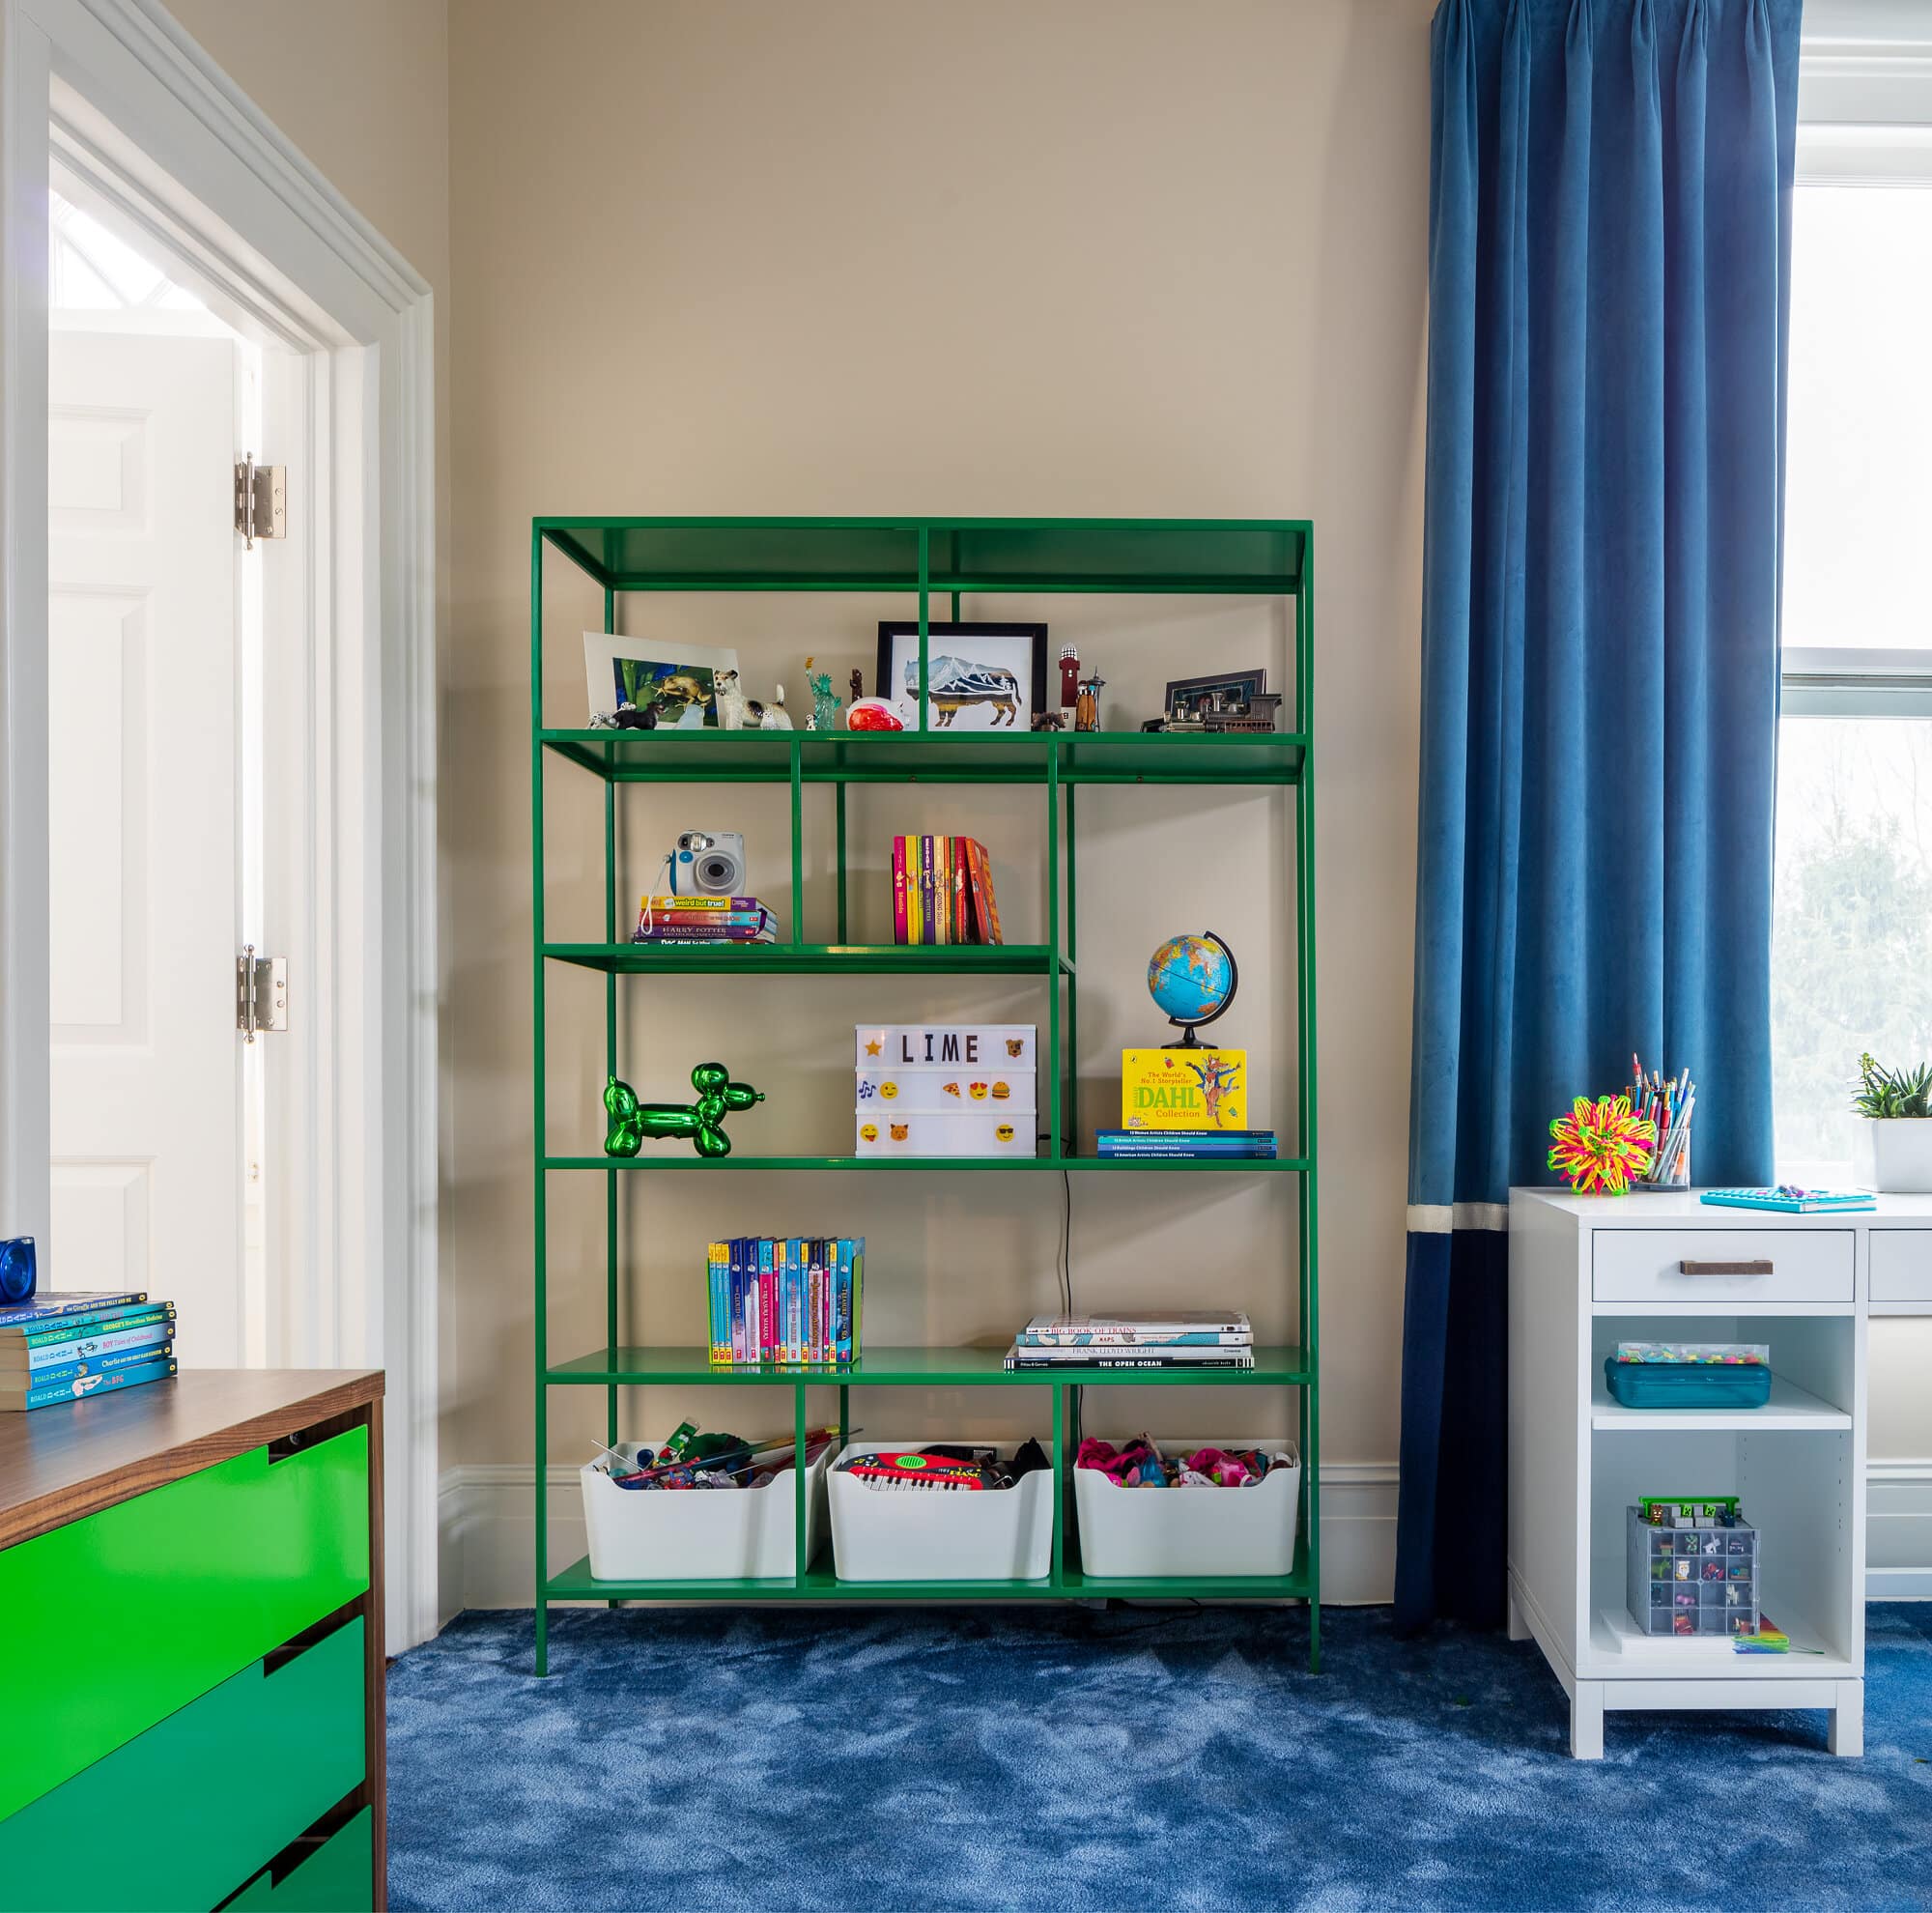 Bold color with lots of storage for this youth bedroom.